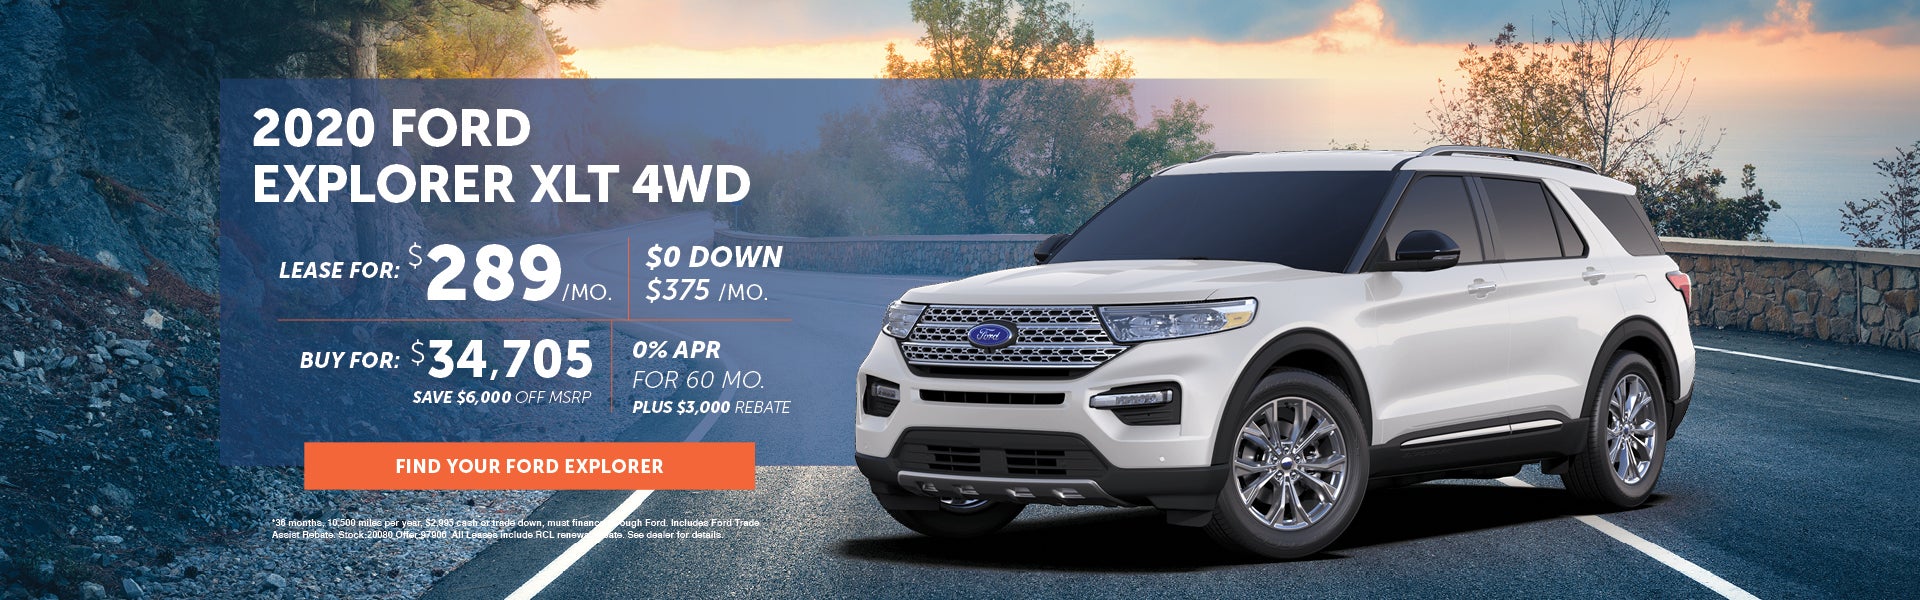 Ford Explorer Deals and Specials in MA Ford Explorer Lease Deals Near